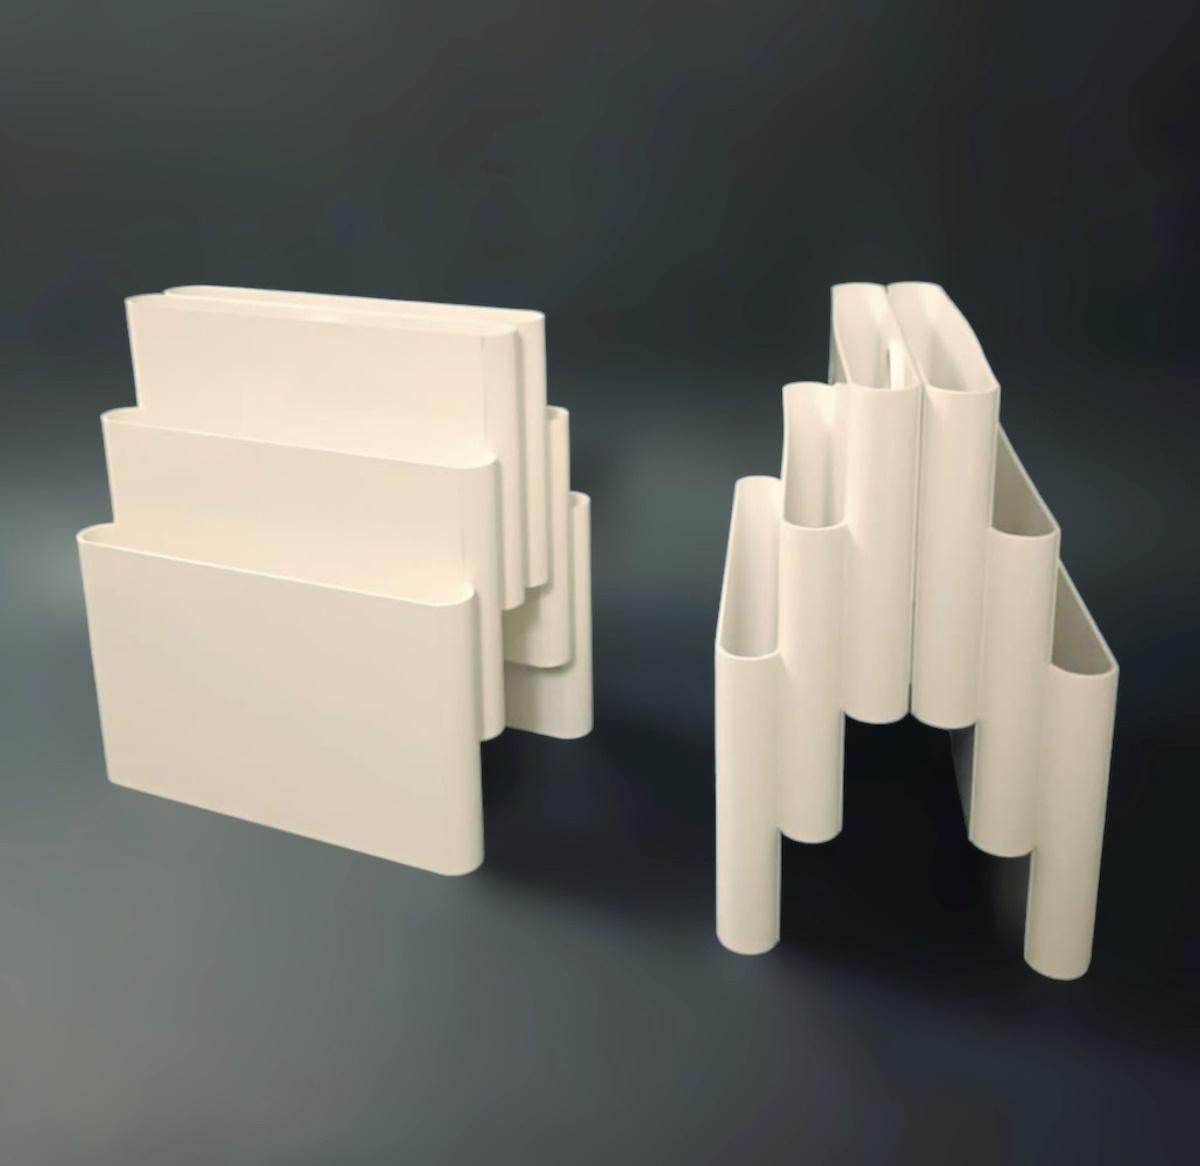 Vintage Italian mid-century white plastic magazine racks with six compartments and a round handle, designed by Giotto Stopinno for Kartell, model 4675 / Made in Milan Italy 1970s
Measures: height 18 inches, width 16 inches, depth 12 inches
Order